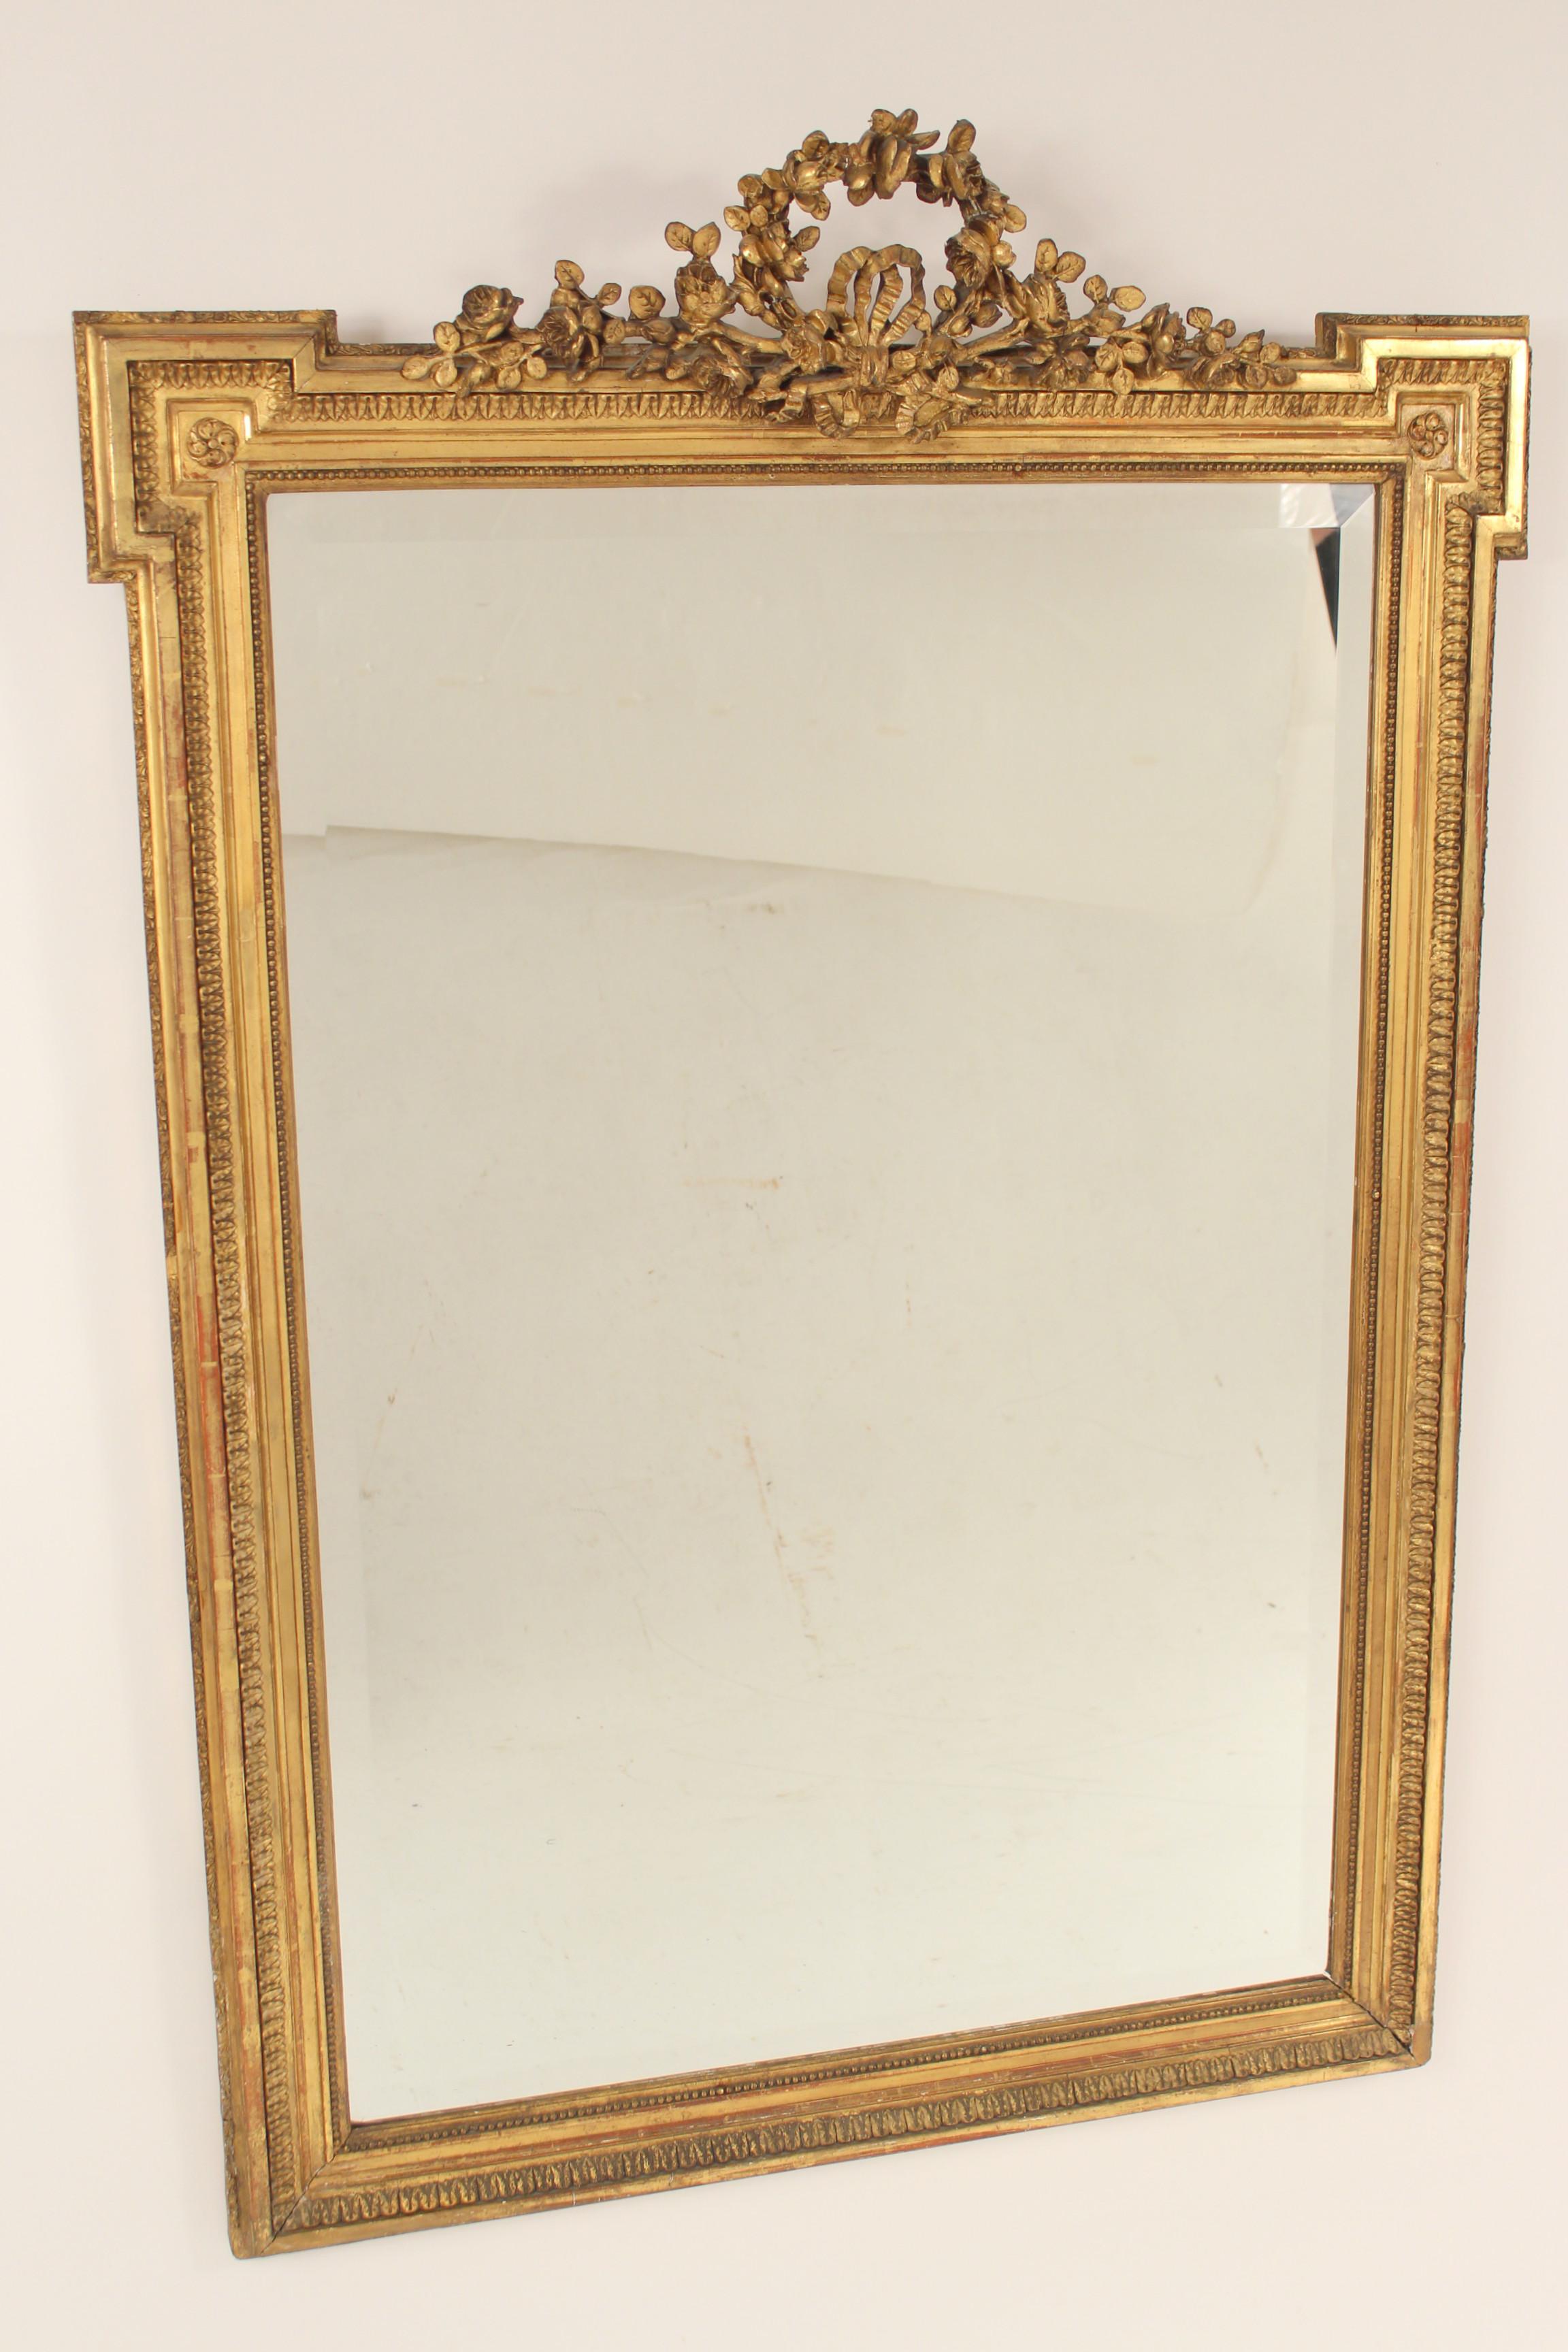 Antique Louis XVI style gilt wood and gesso mirror, circa 1900. The gilding on this mirror is gold leaf.